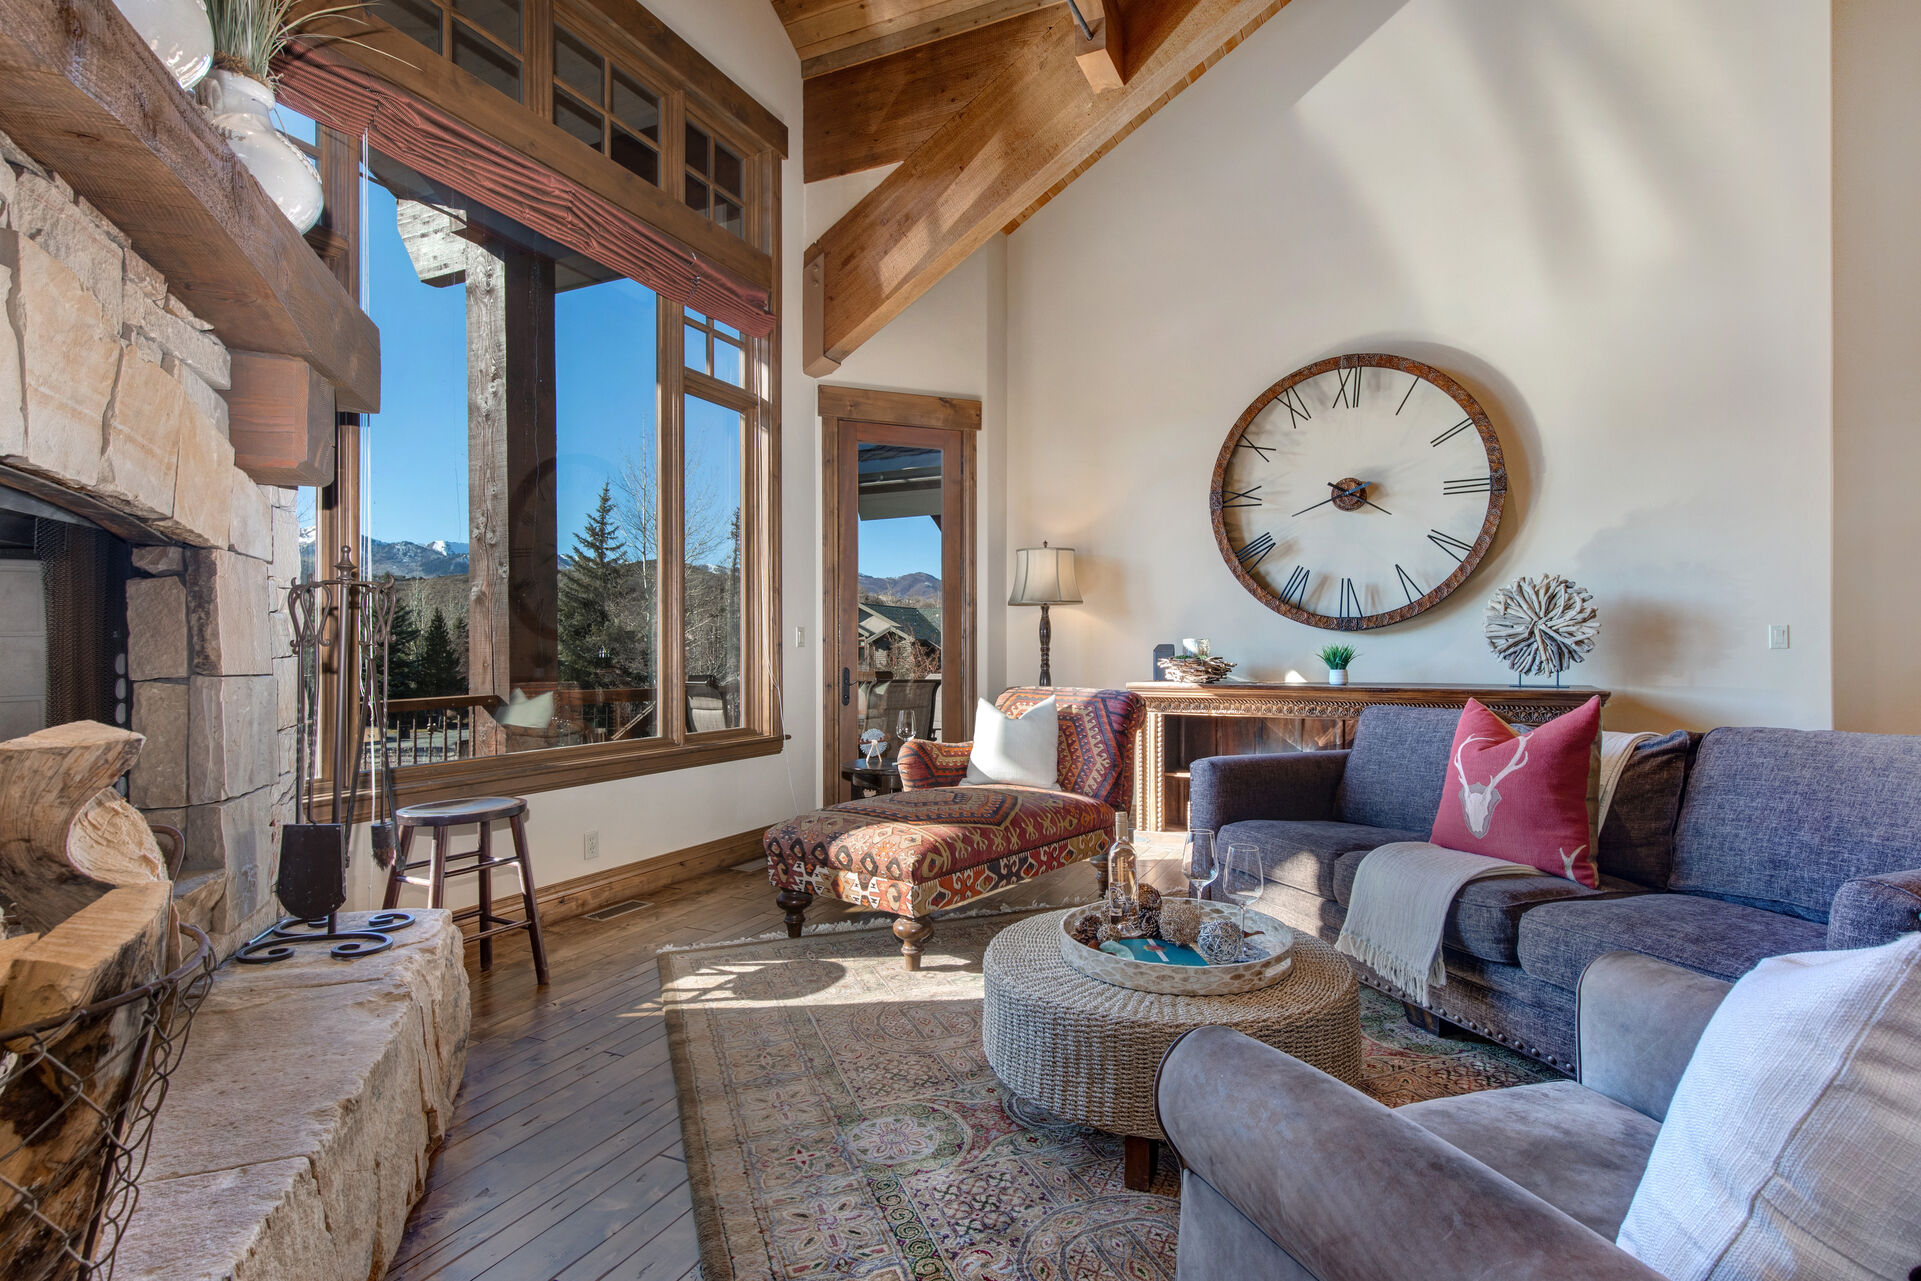 Main Level Living Room with vaulted ceilings, gas-assist fireplace, plush furnishings, wet bar access, and stunning views of the surrounding mountains